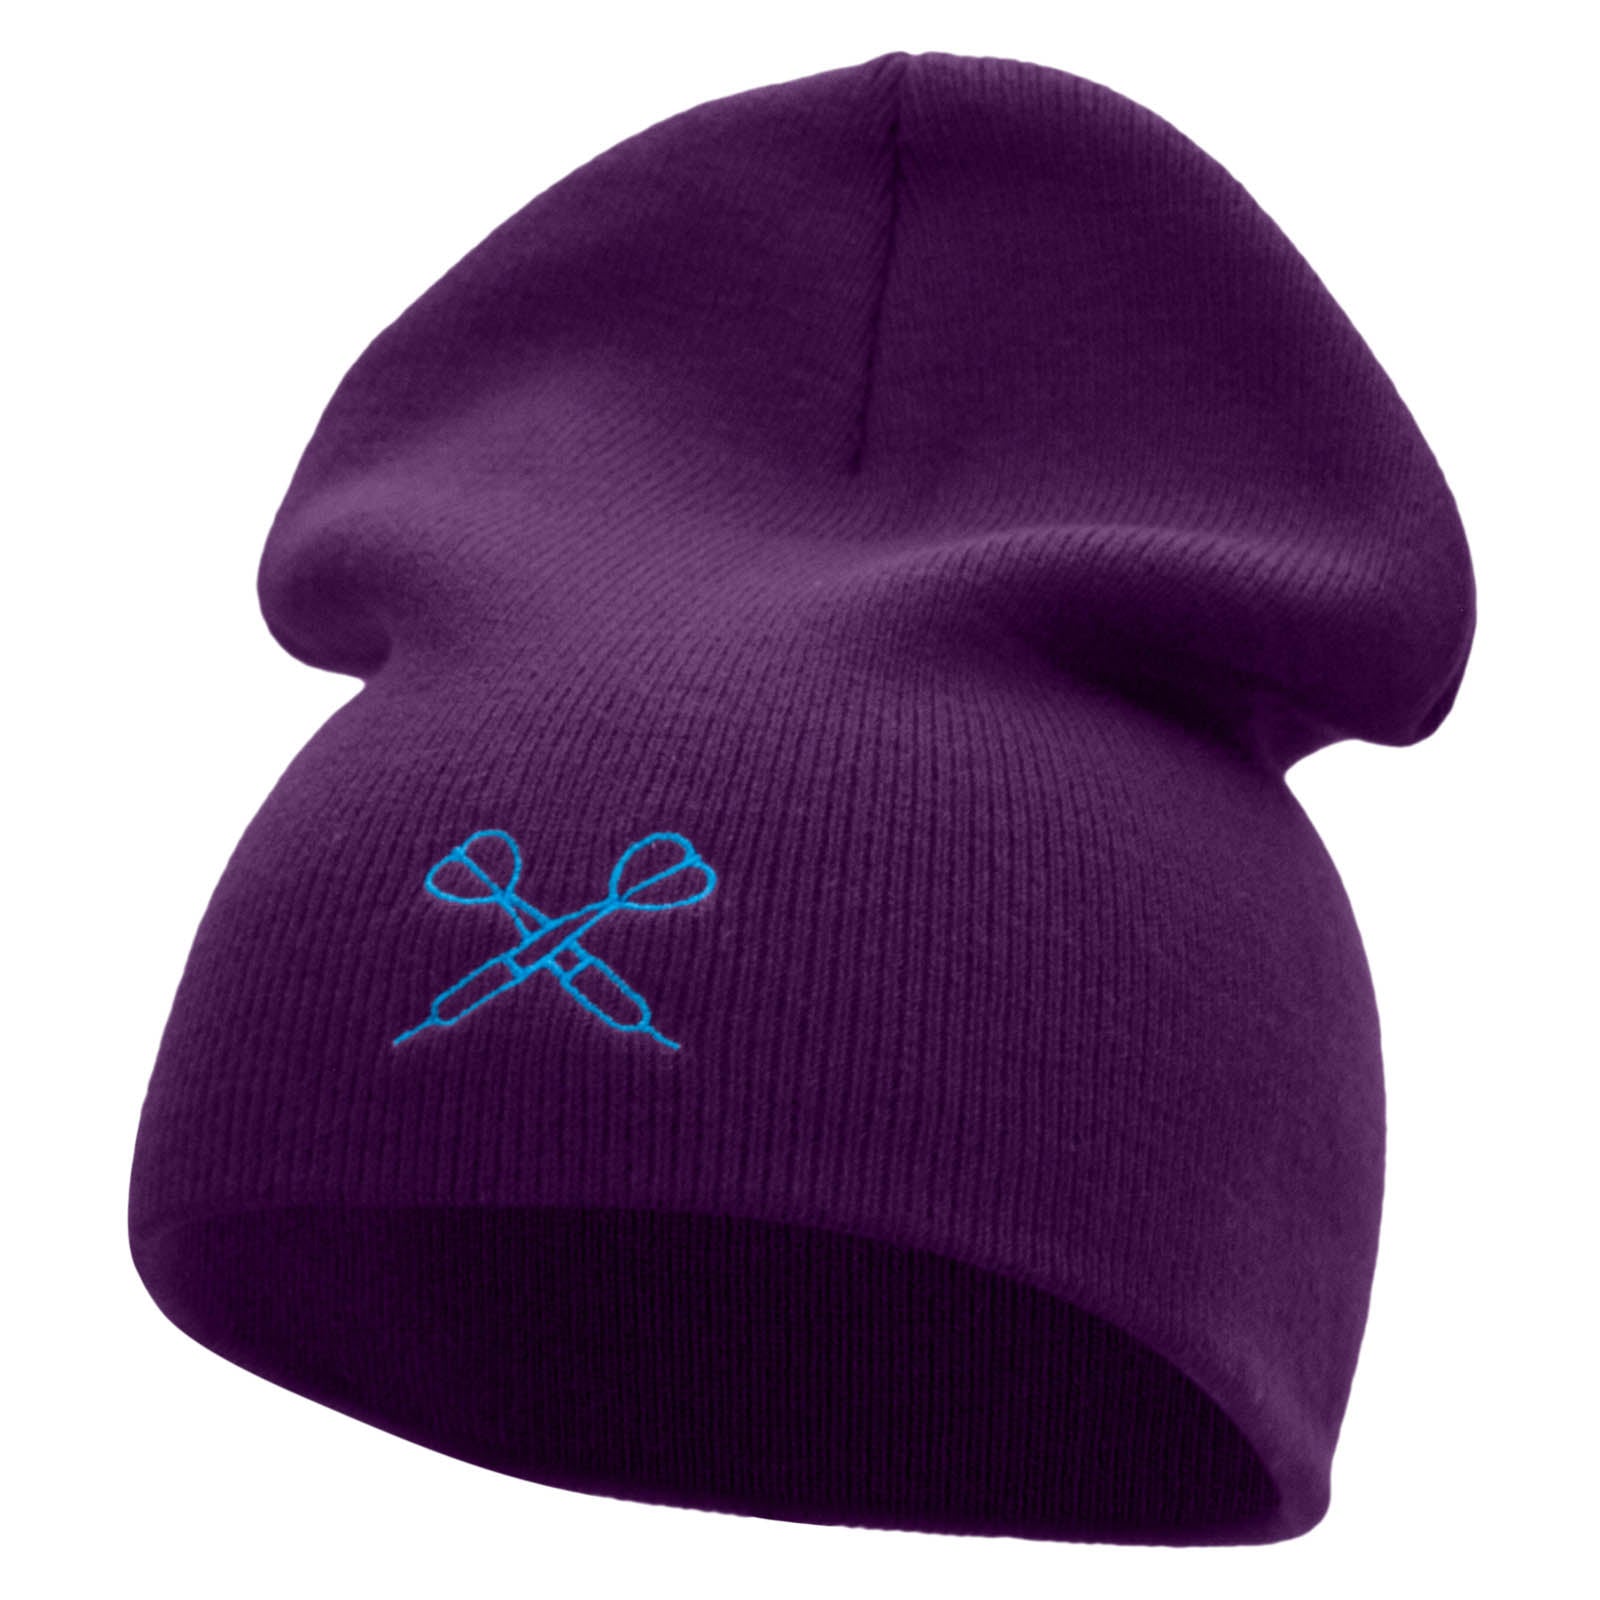 The Dual Darts Embroidered 8 Inch Short Beanie Made in USA - Purple OSFM